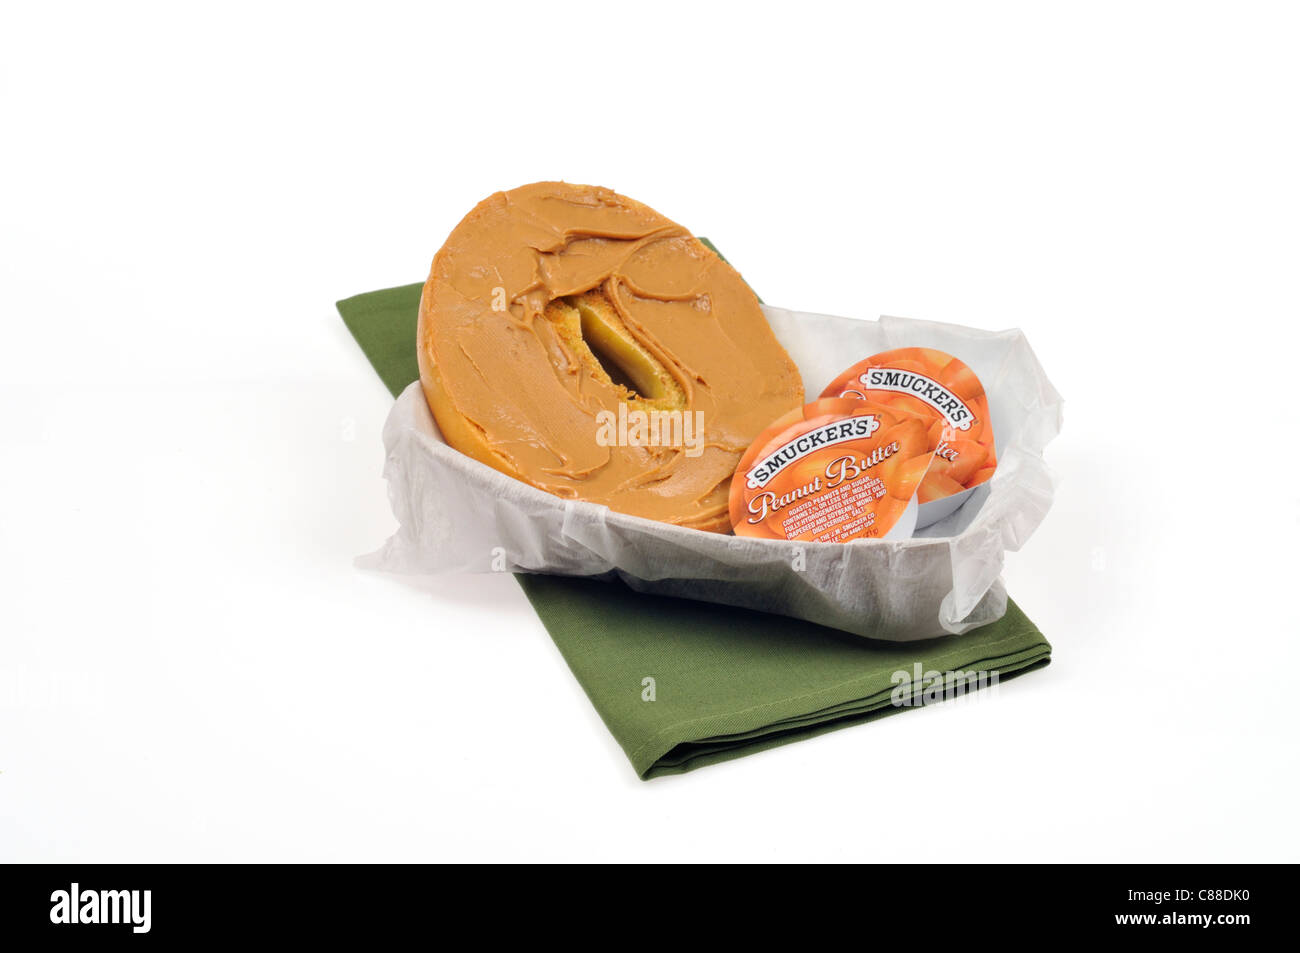 Plain bagel covered  with peanut butter spread and 2 containers of smuckers in a  paper basket  on white background, cutout. Stock Photo